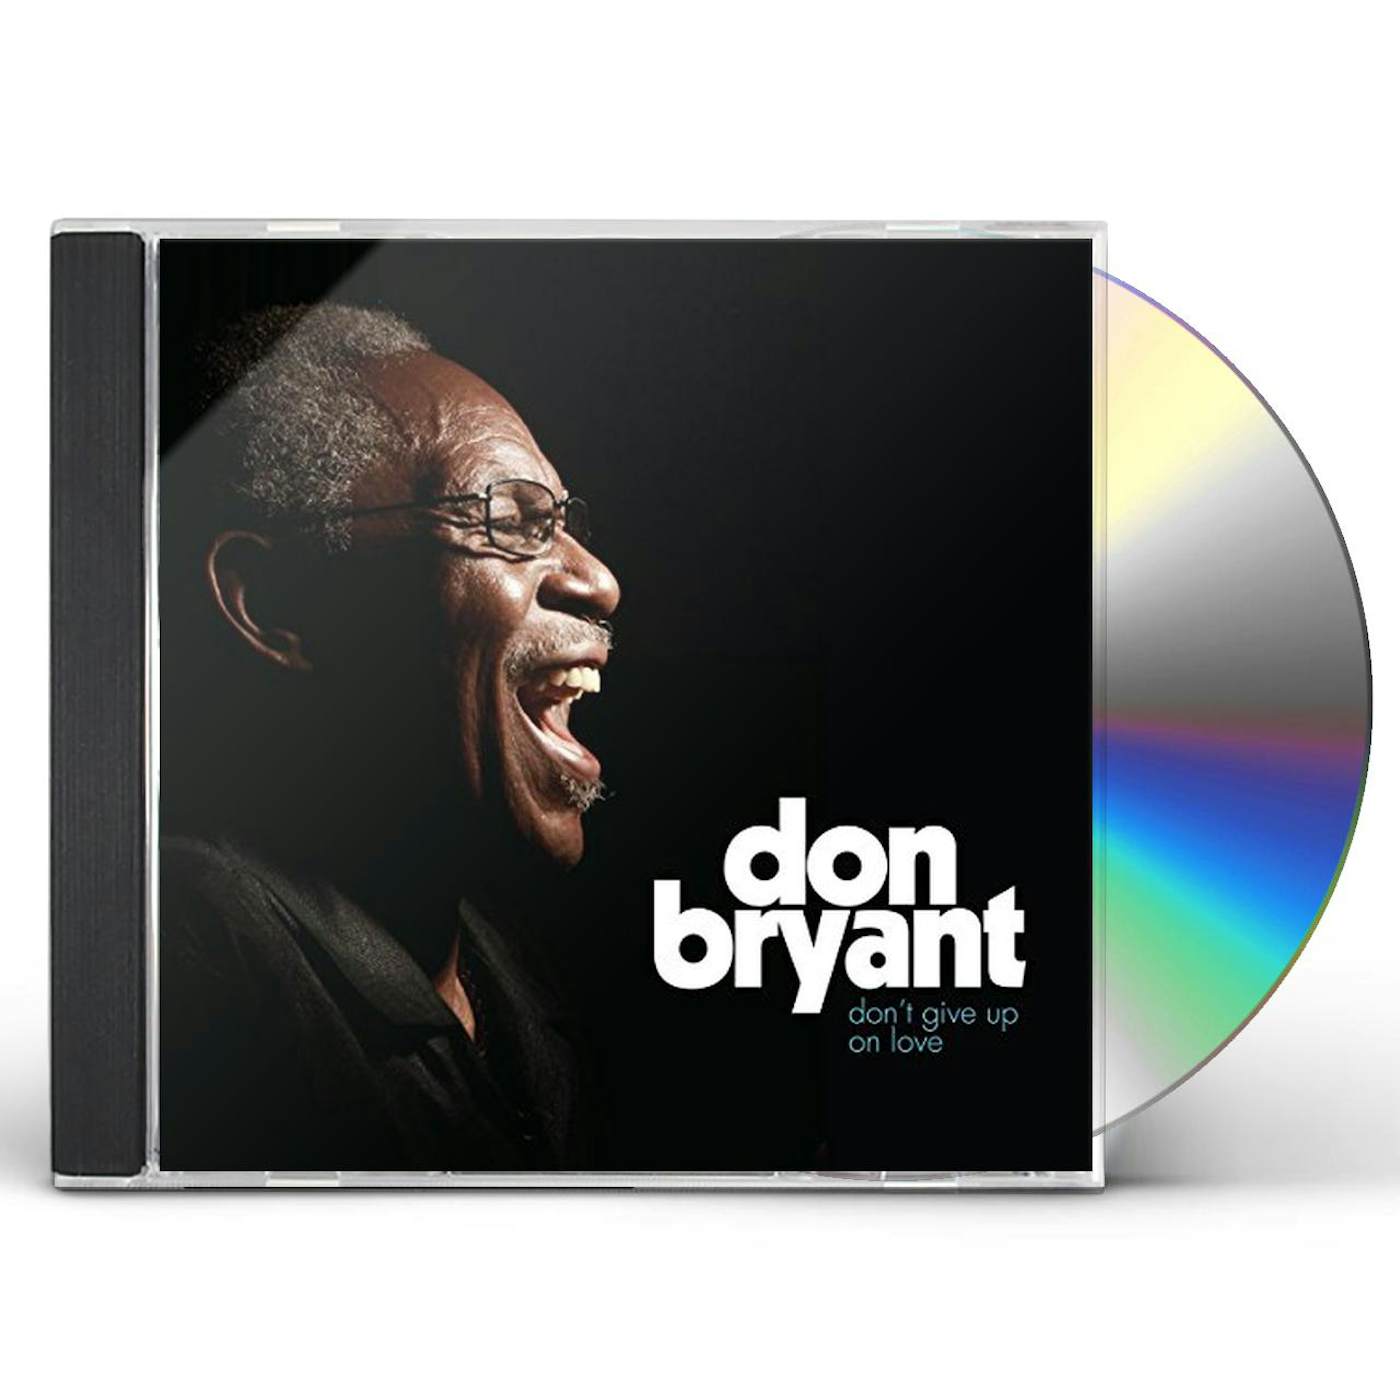 Don Bryant DON'T GIVE UP ON LOVE CD